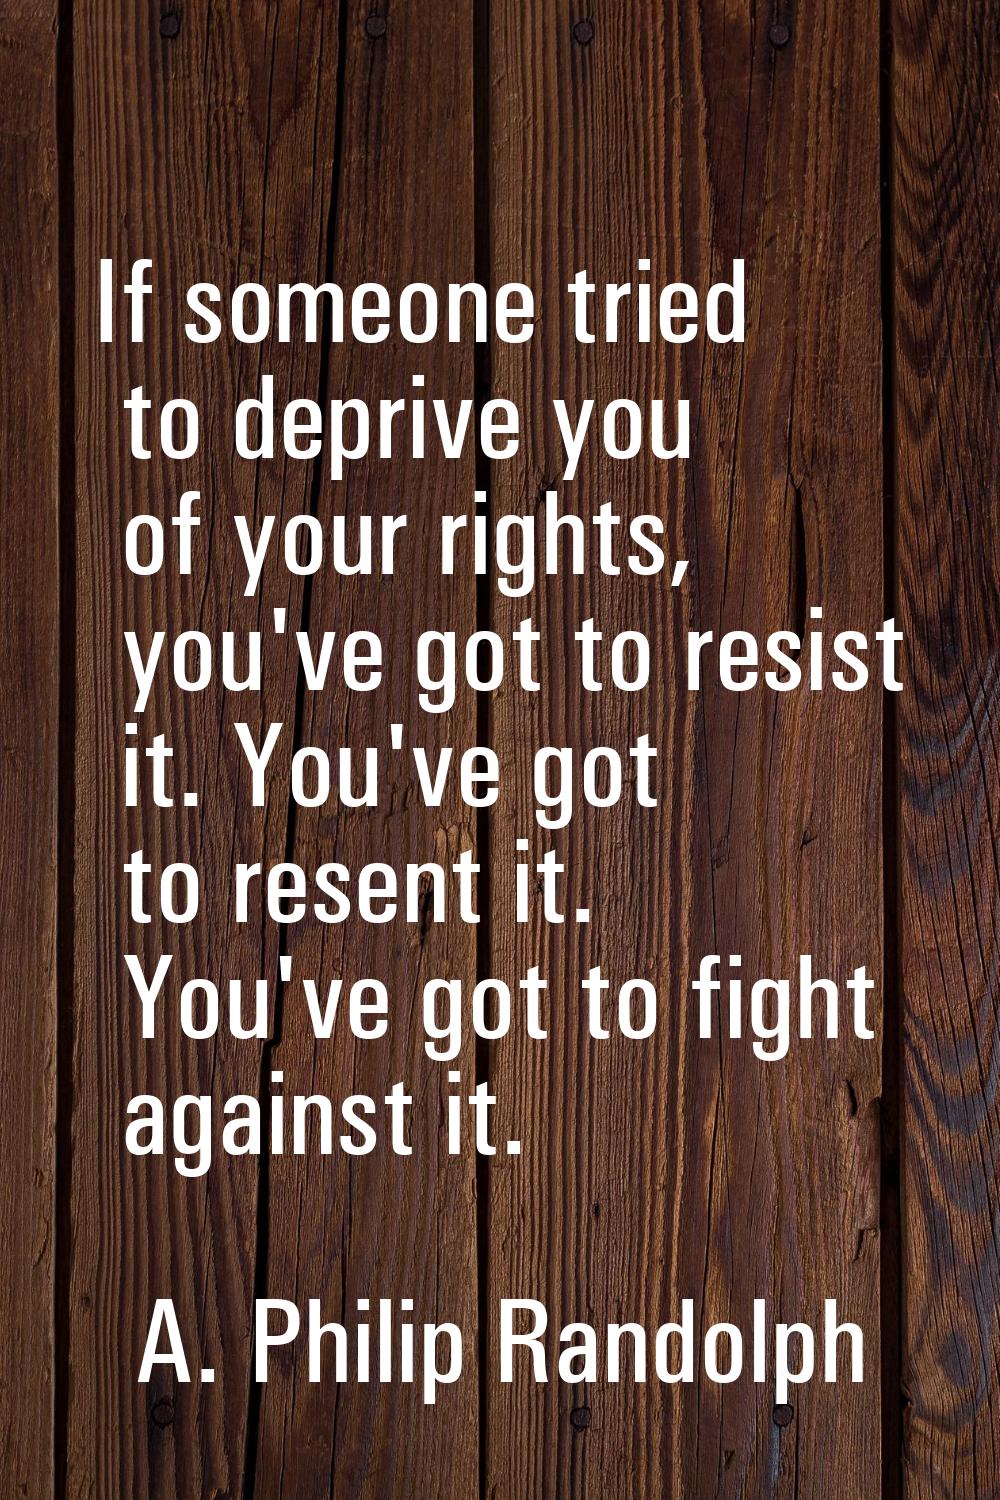 If someone tried to deprive you of your rights, you've got to resist it. You've got to resent it. Y